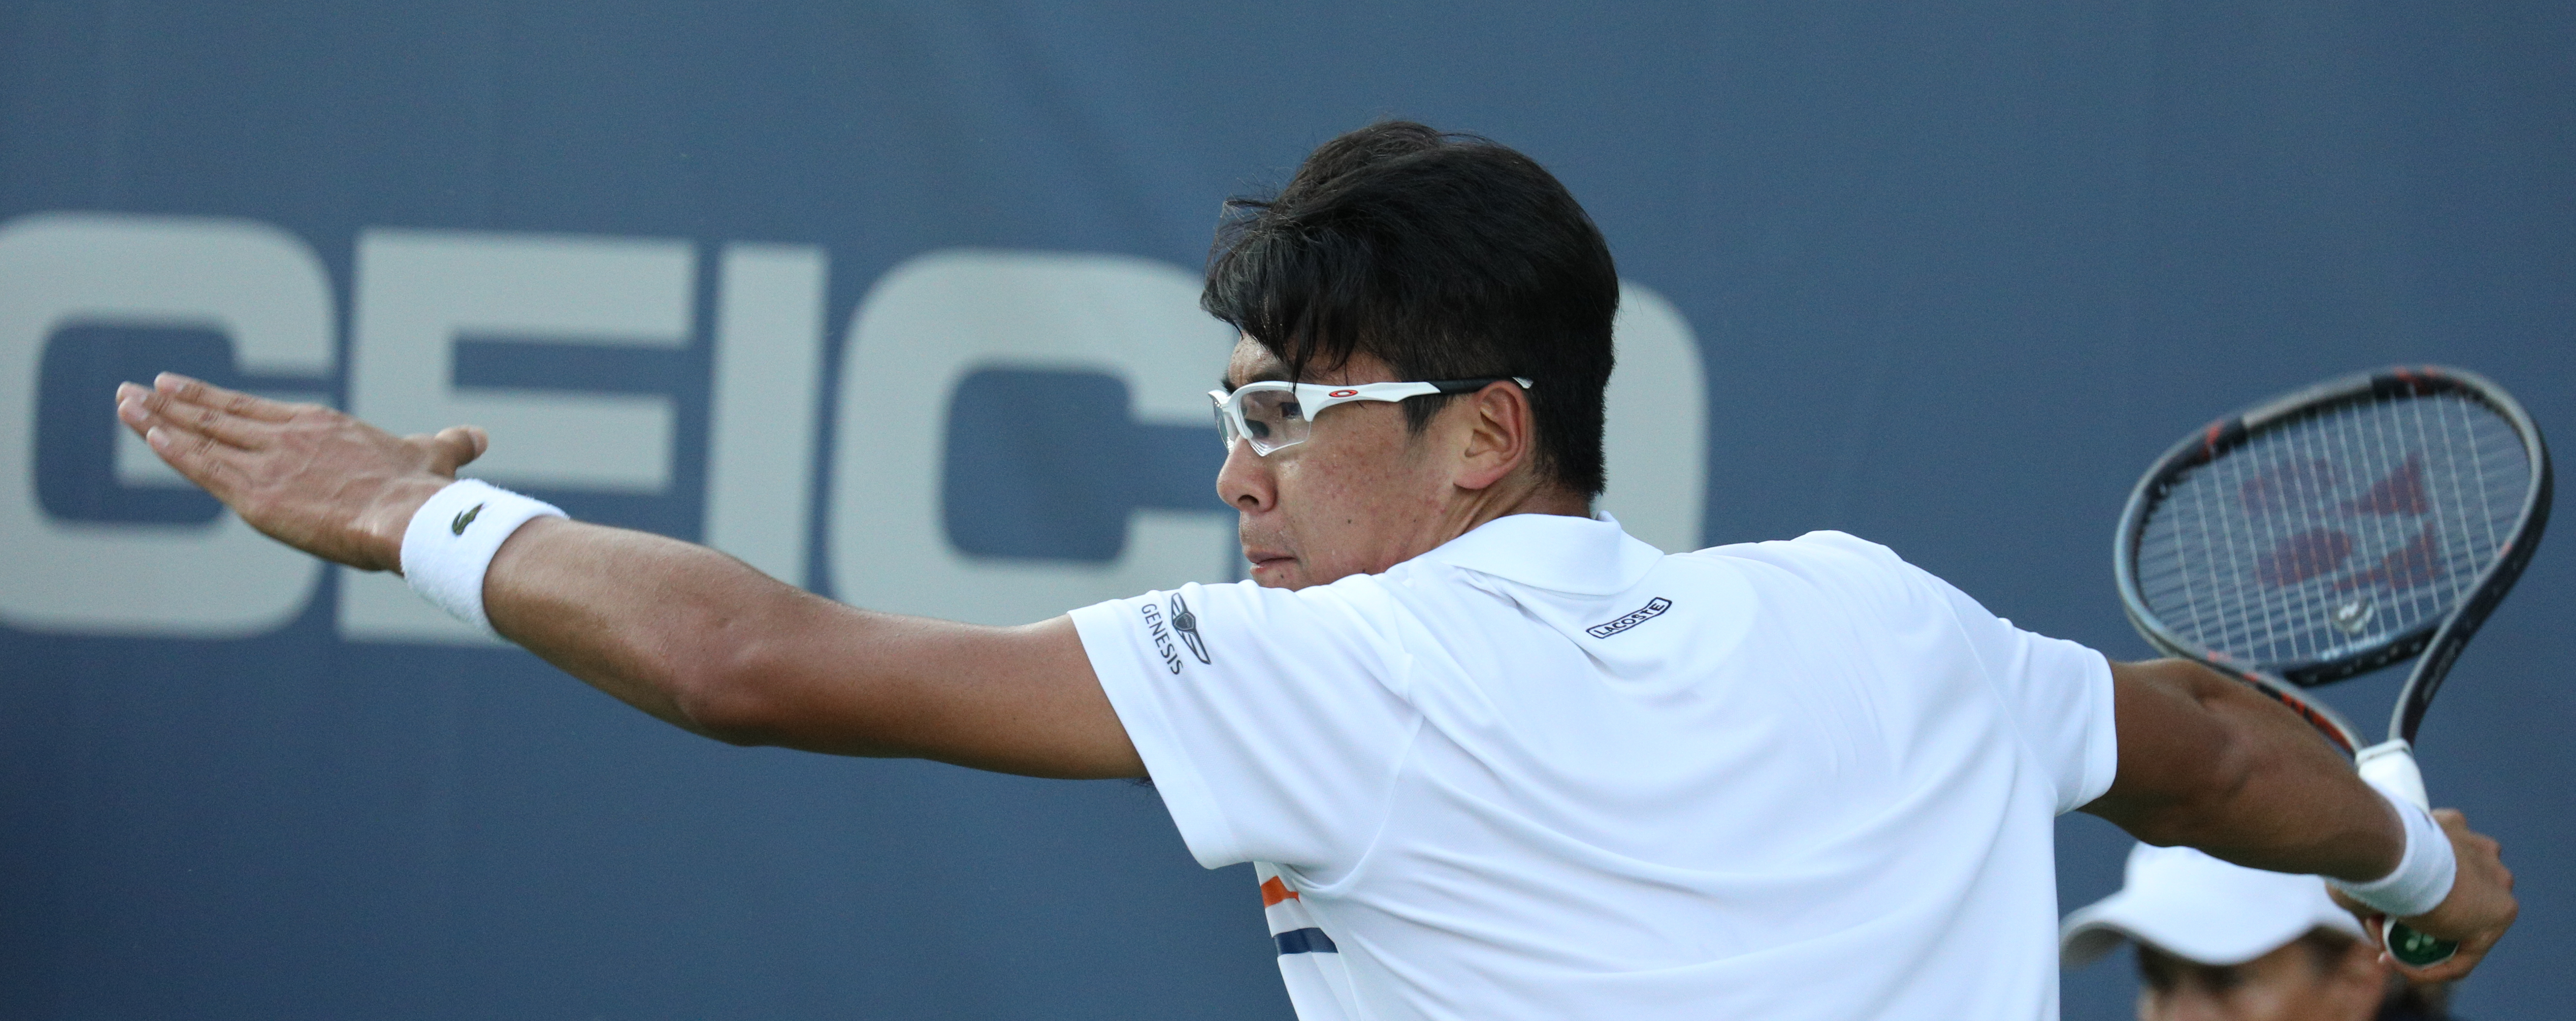 Can You Play Tennis With Prescription Glasses? | SportRx